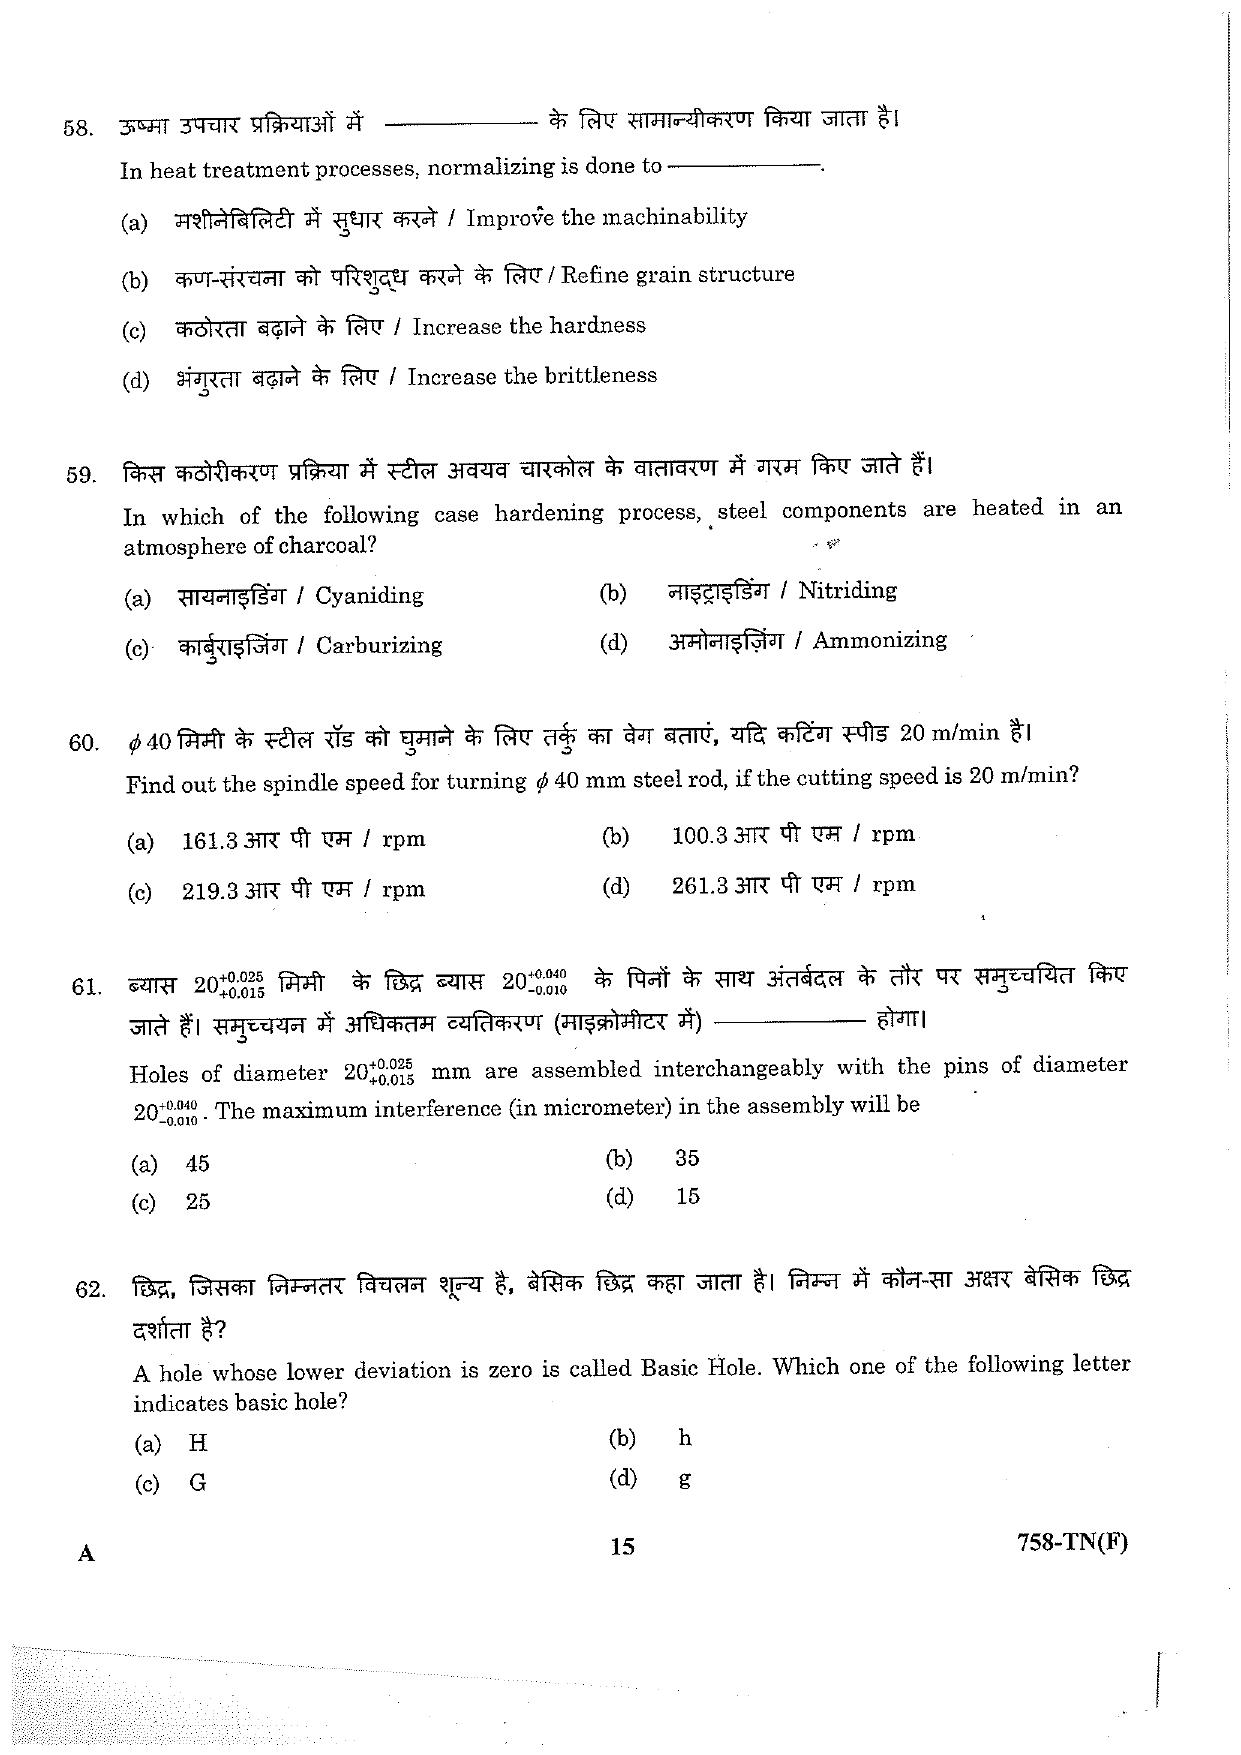 LPSC Technician ‘B’ (Fitter) 2023 Question Paper - Page 15